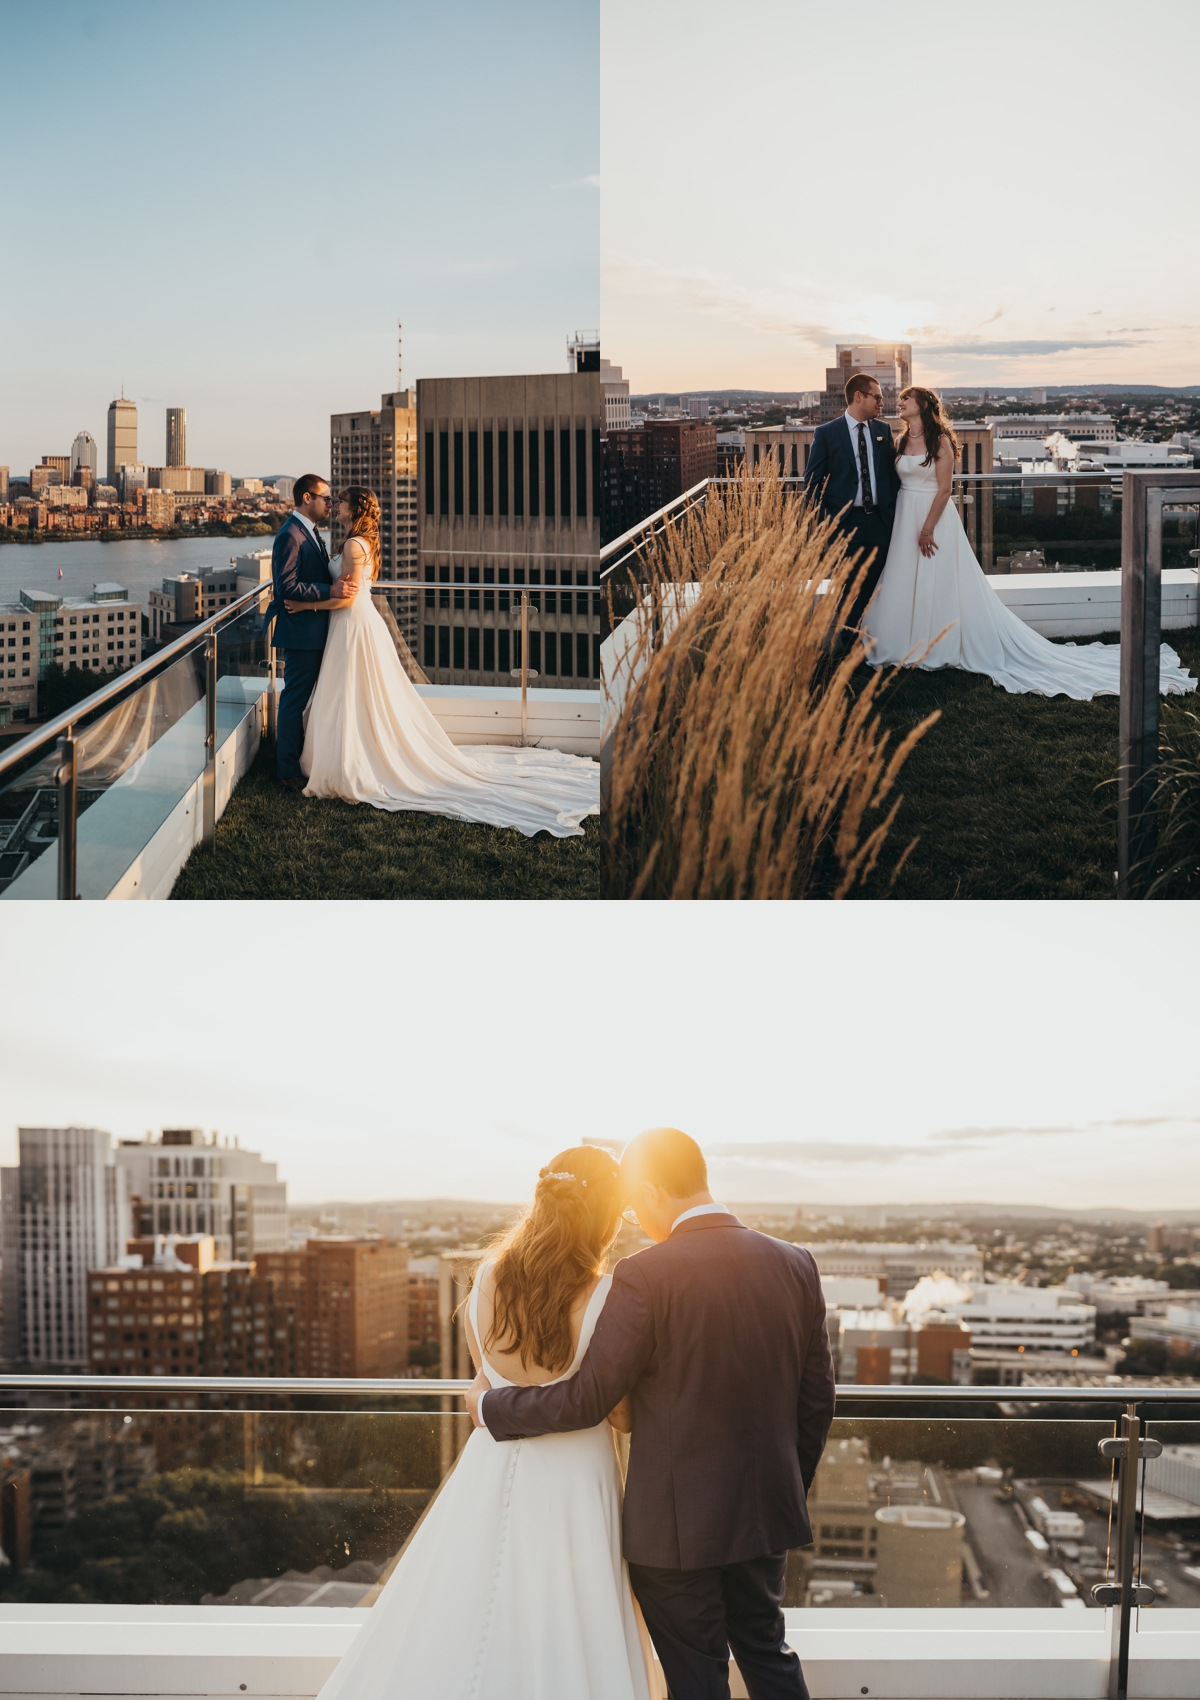 Rooftop wedding pictures overlooking downtown Boston